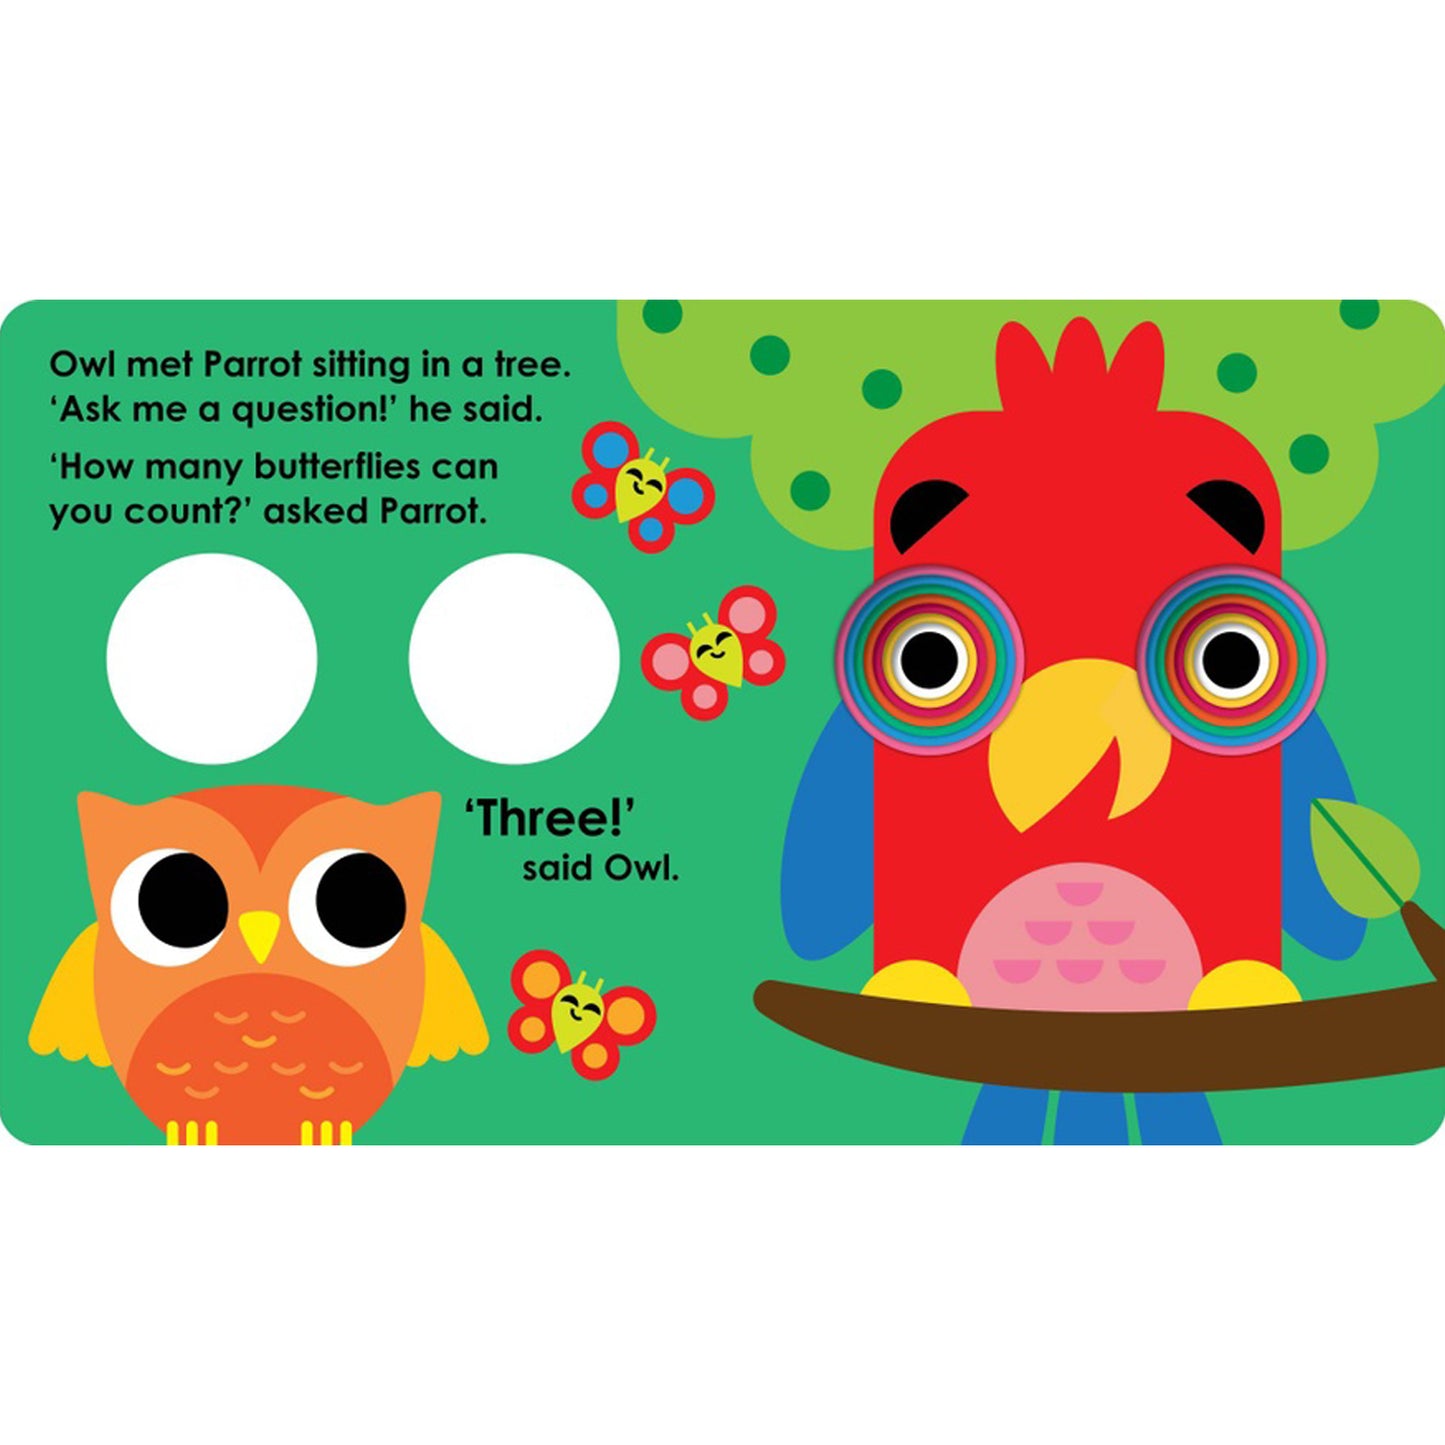 Graduating Board Book – The Wise Owl  | Children's books about birds | Early learning books | Board books |  Die cut board books